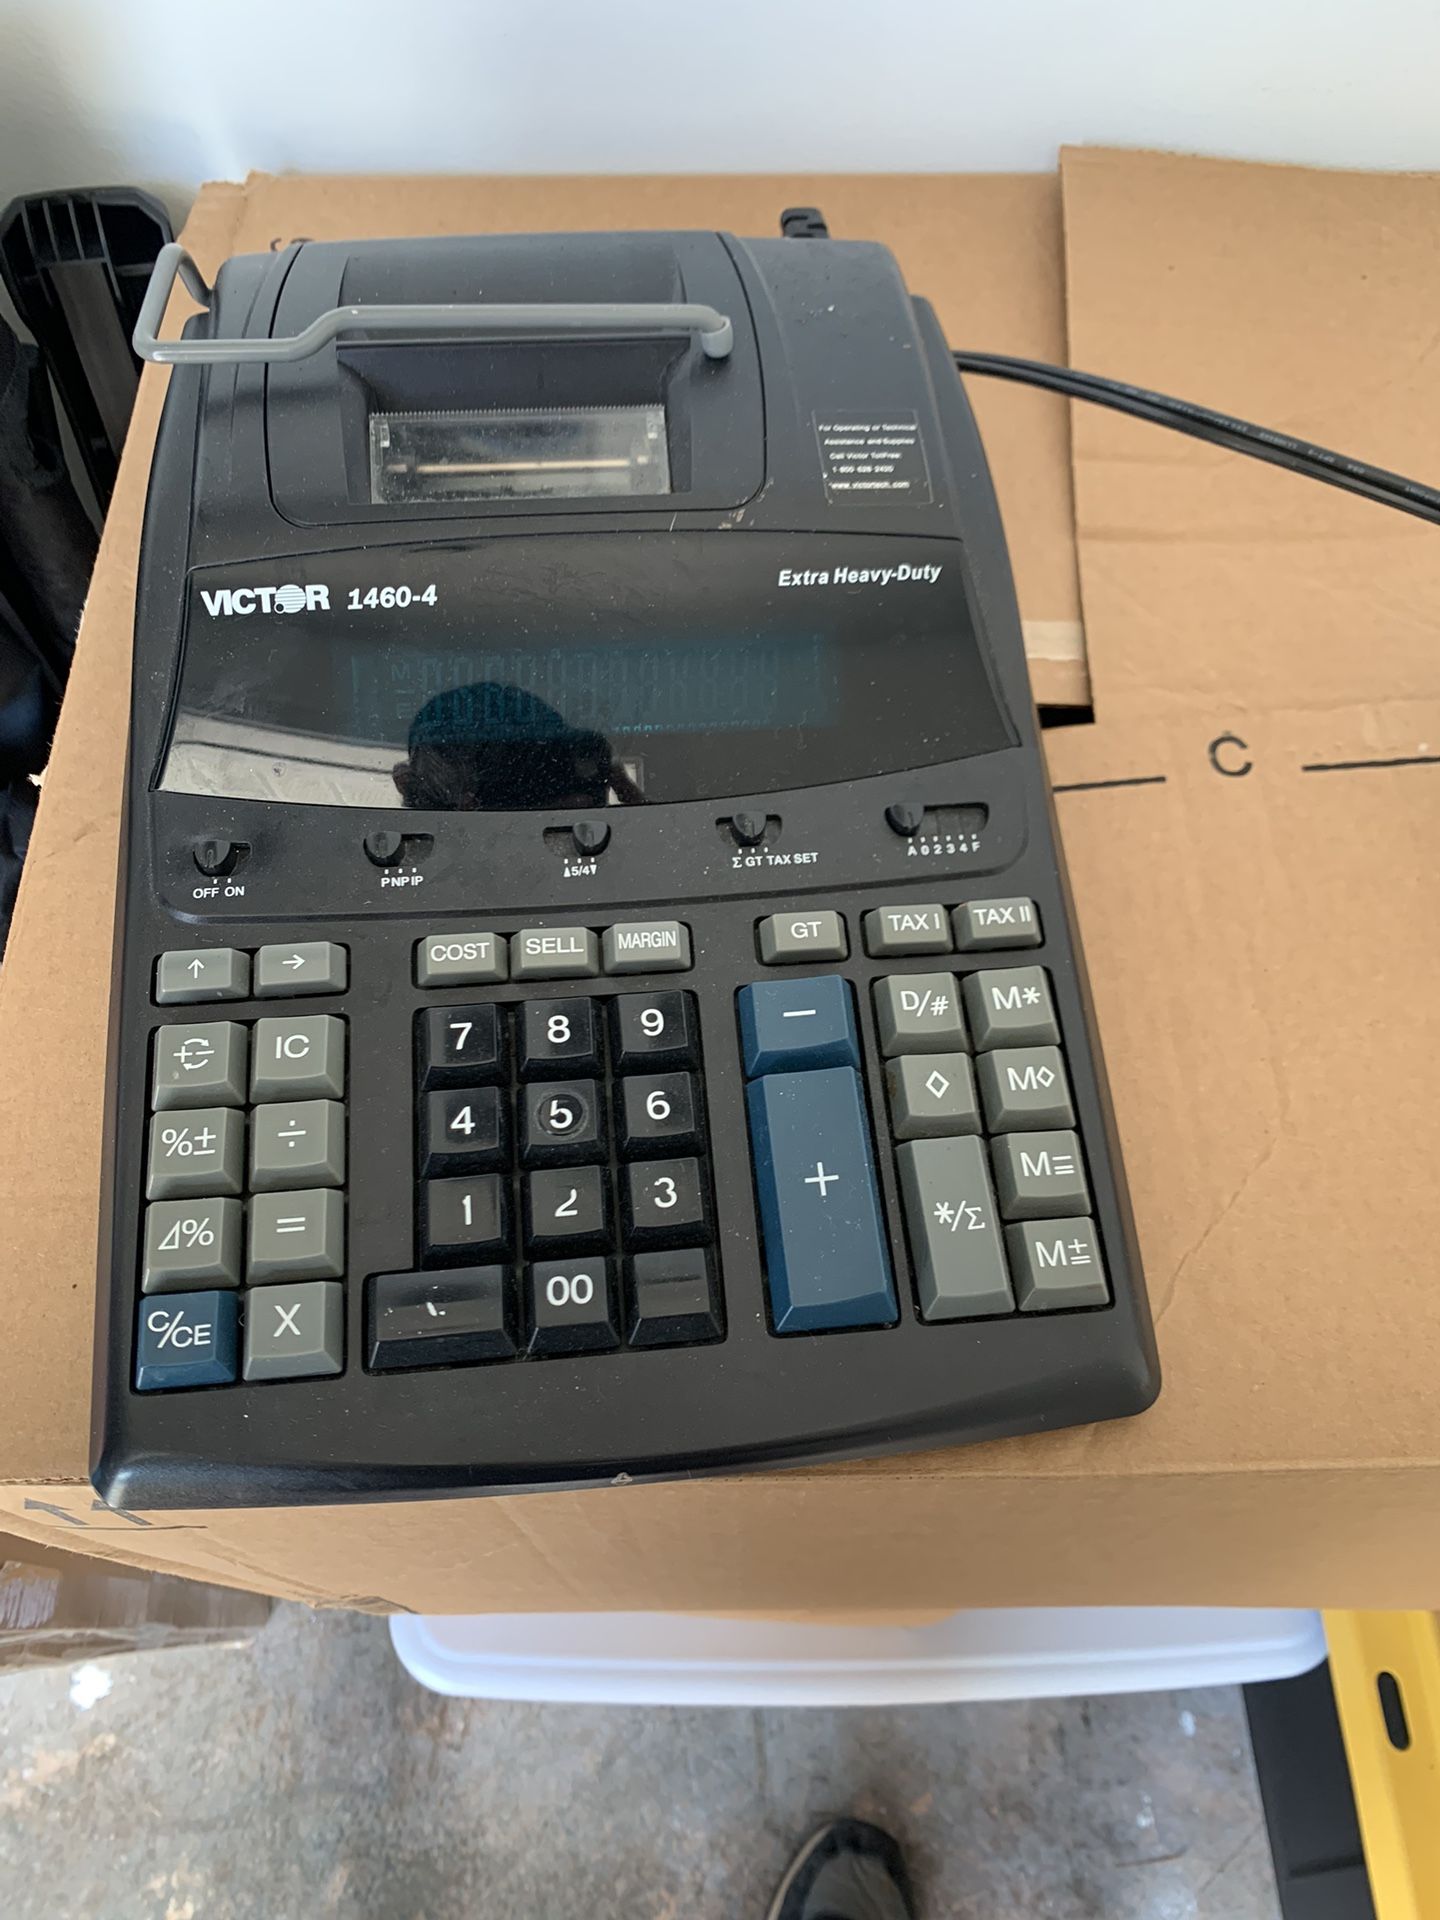 Calculator Best Offer Takes It 